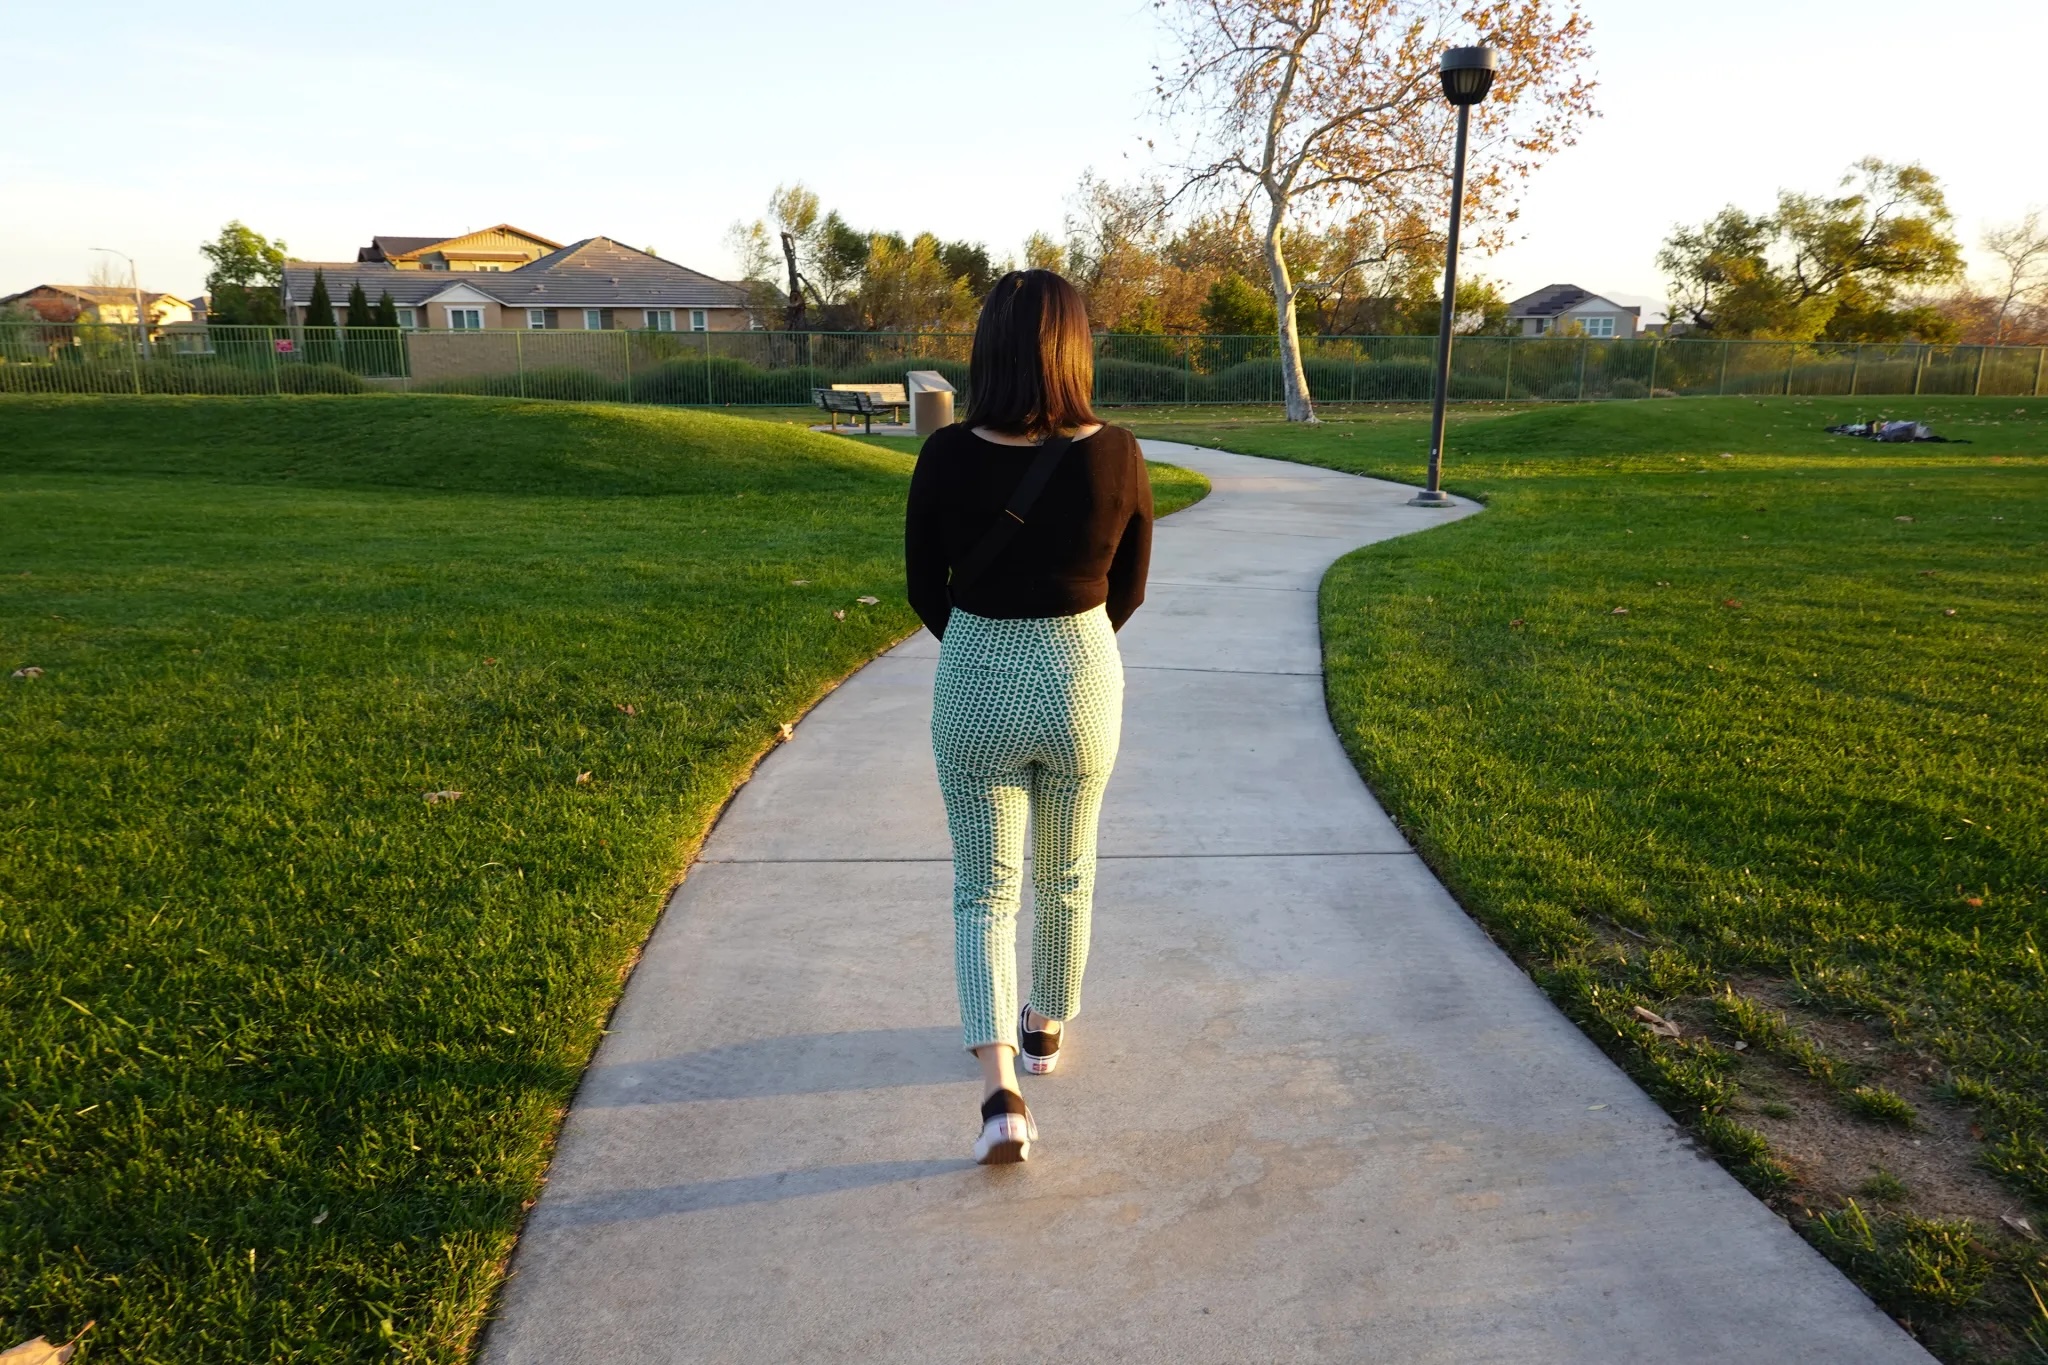 A young woman seen walking along a path surrounded by lawns on a campus.